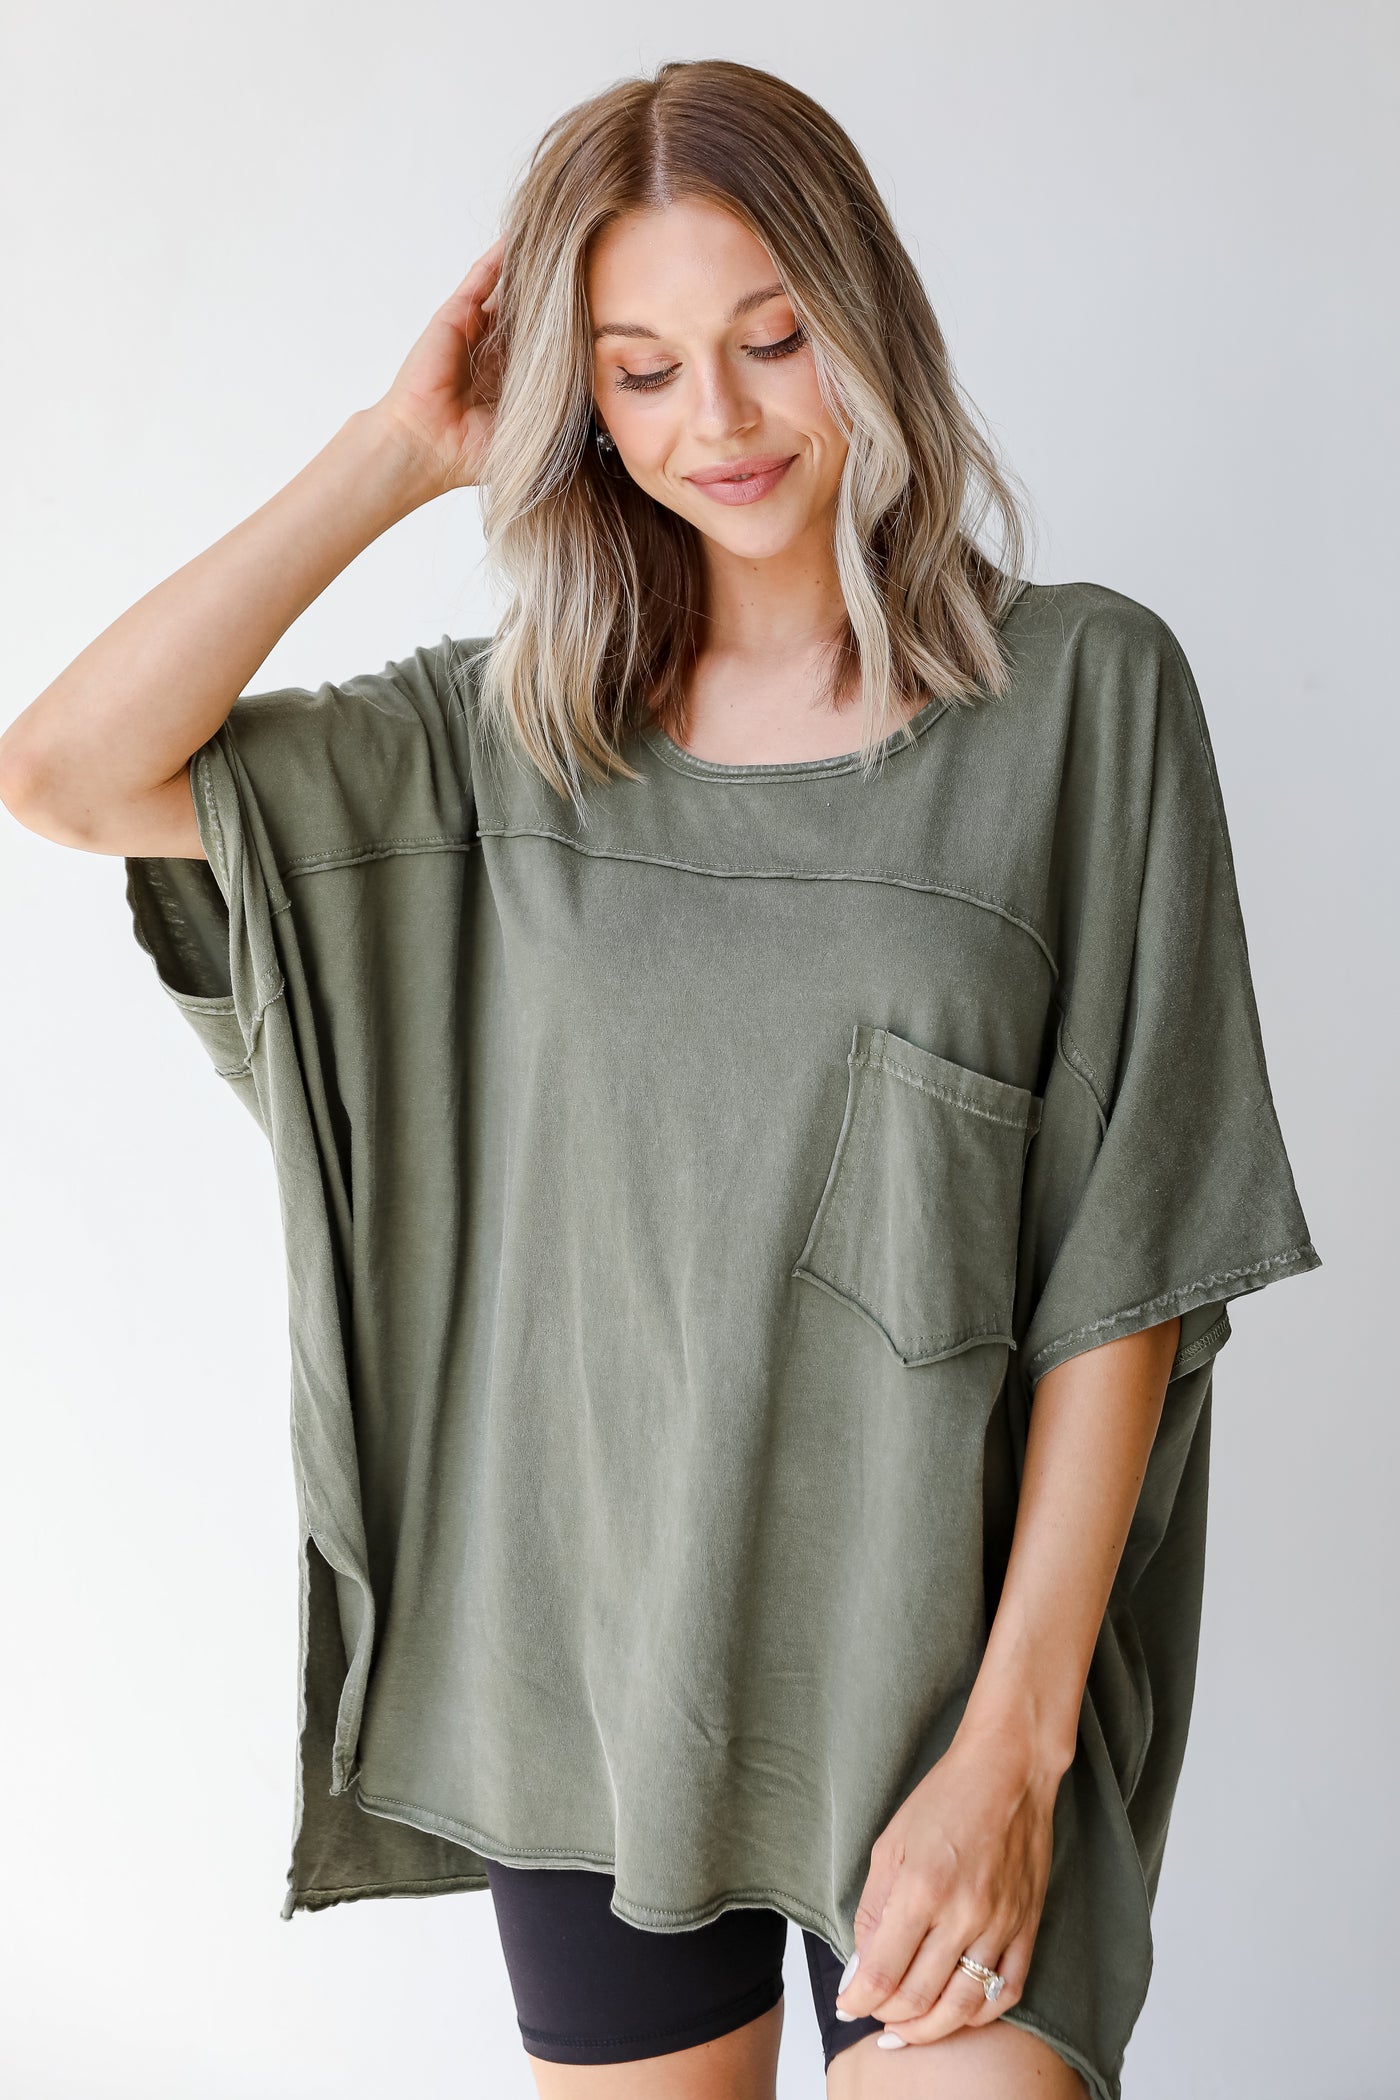 Oversized Tee in olive